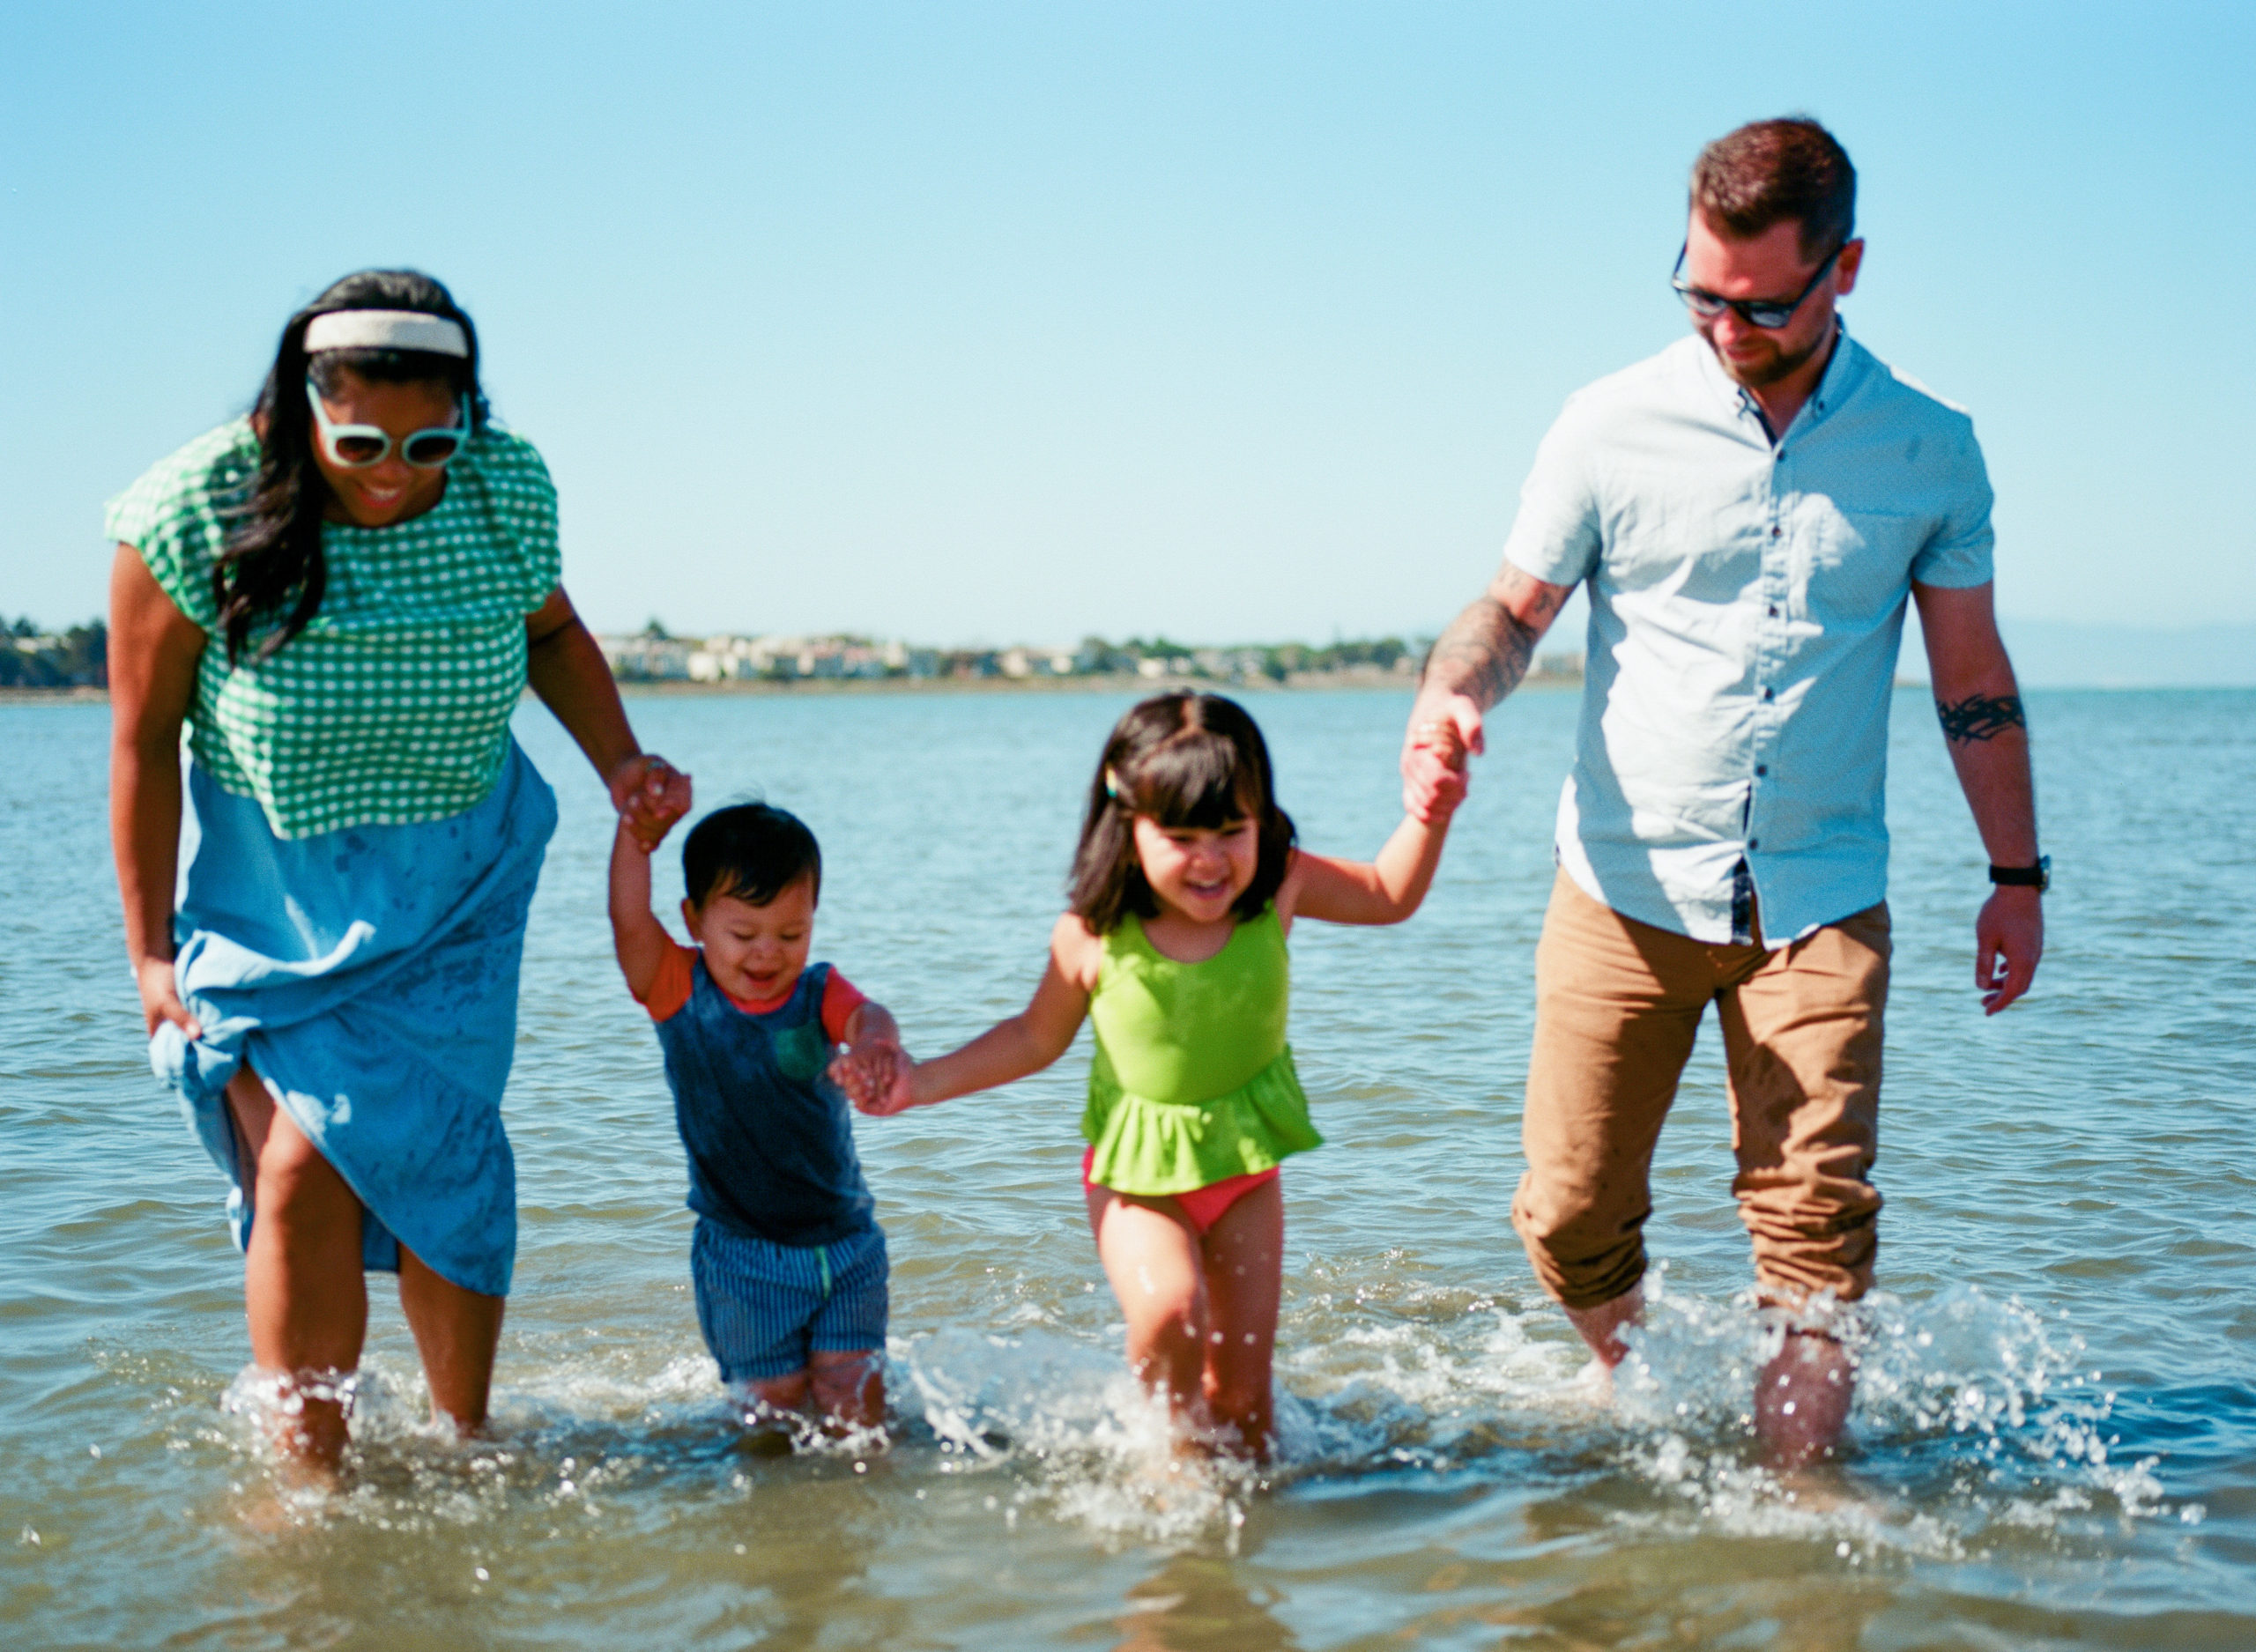 family of four out of focus in ocean